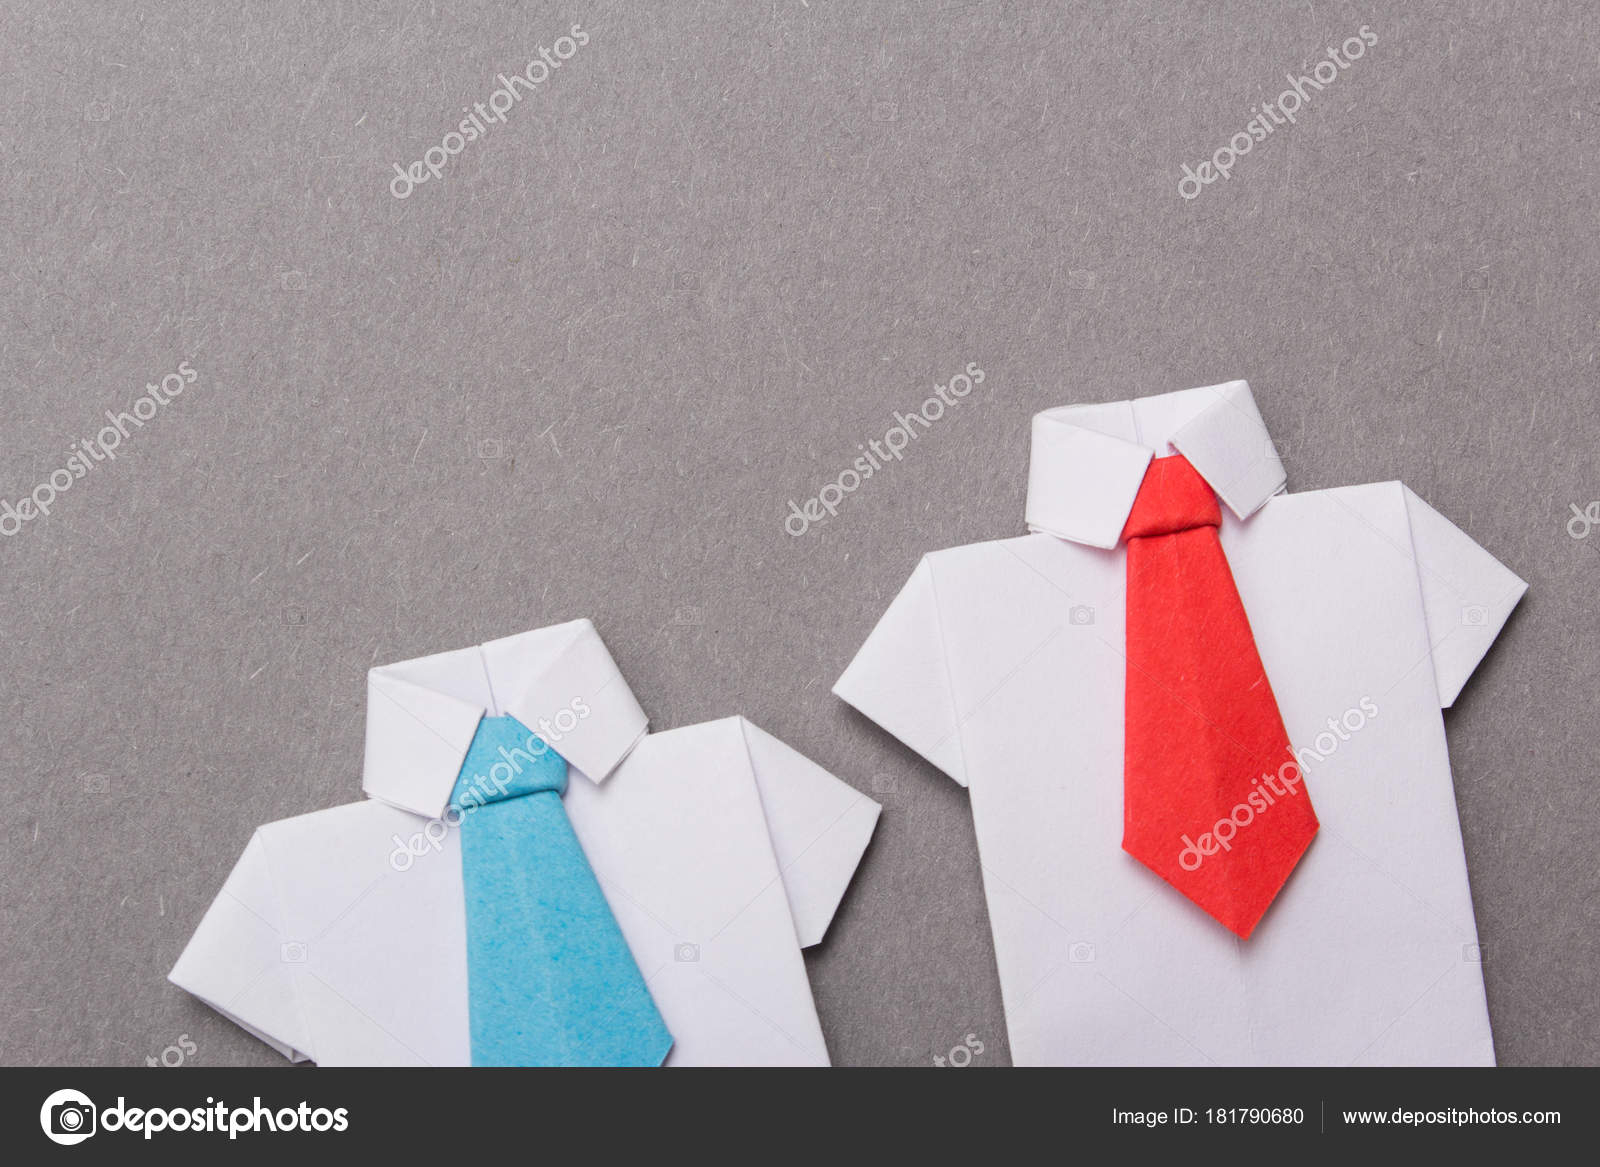 Origami Shirt And Tie Office Workers Shirt Tie Made Paper Origami Copy Space Text Stock